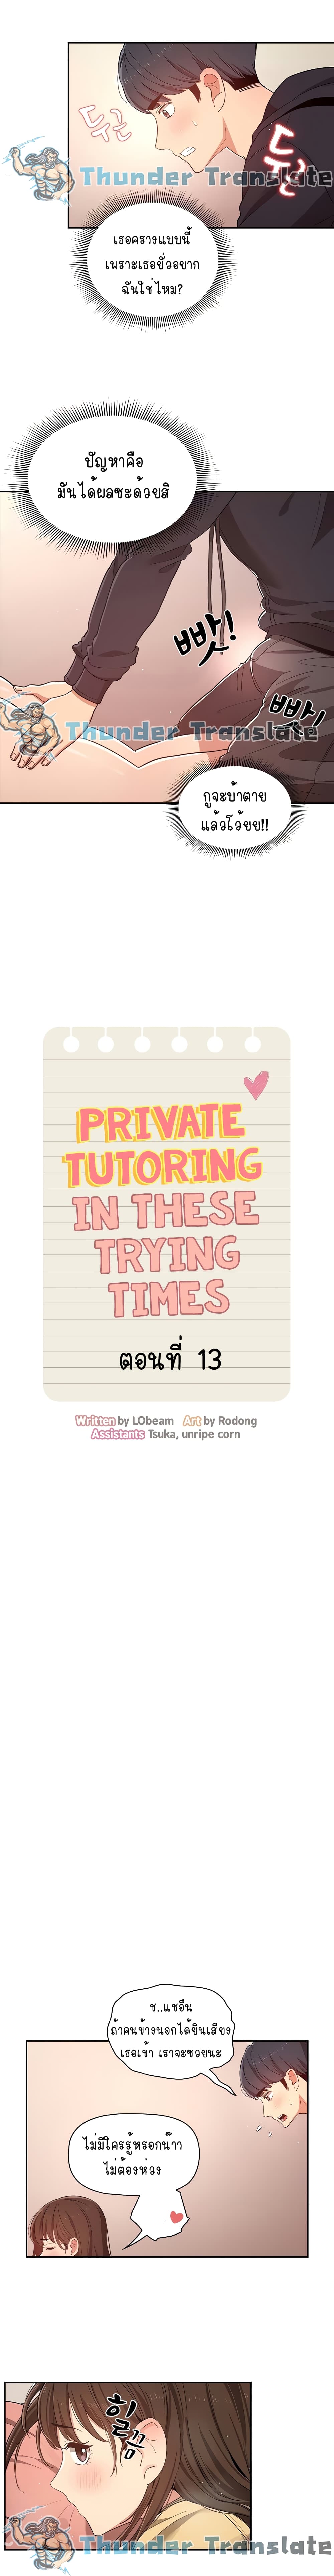 Private Tutoring in These Trying Times13 (2)